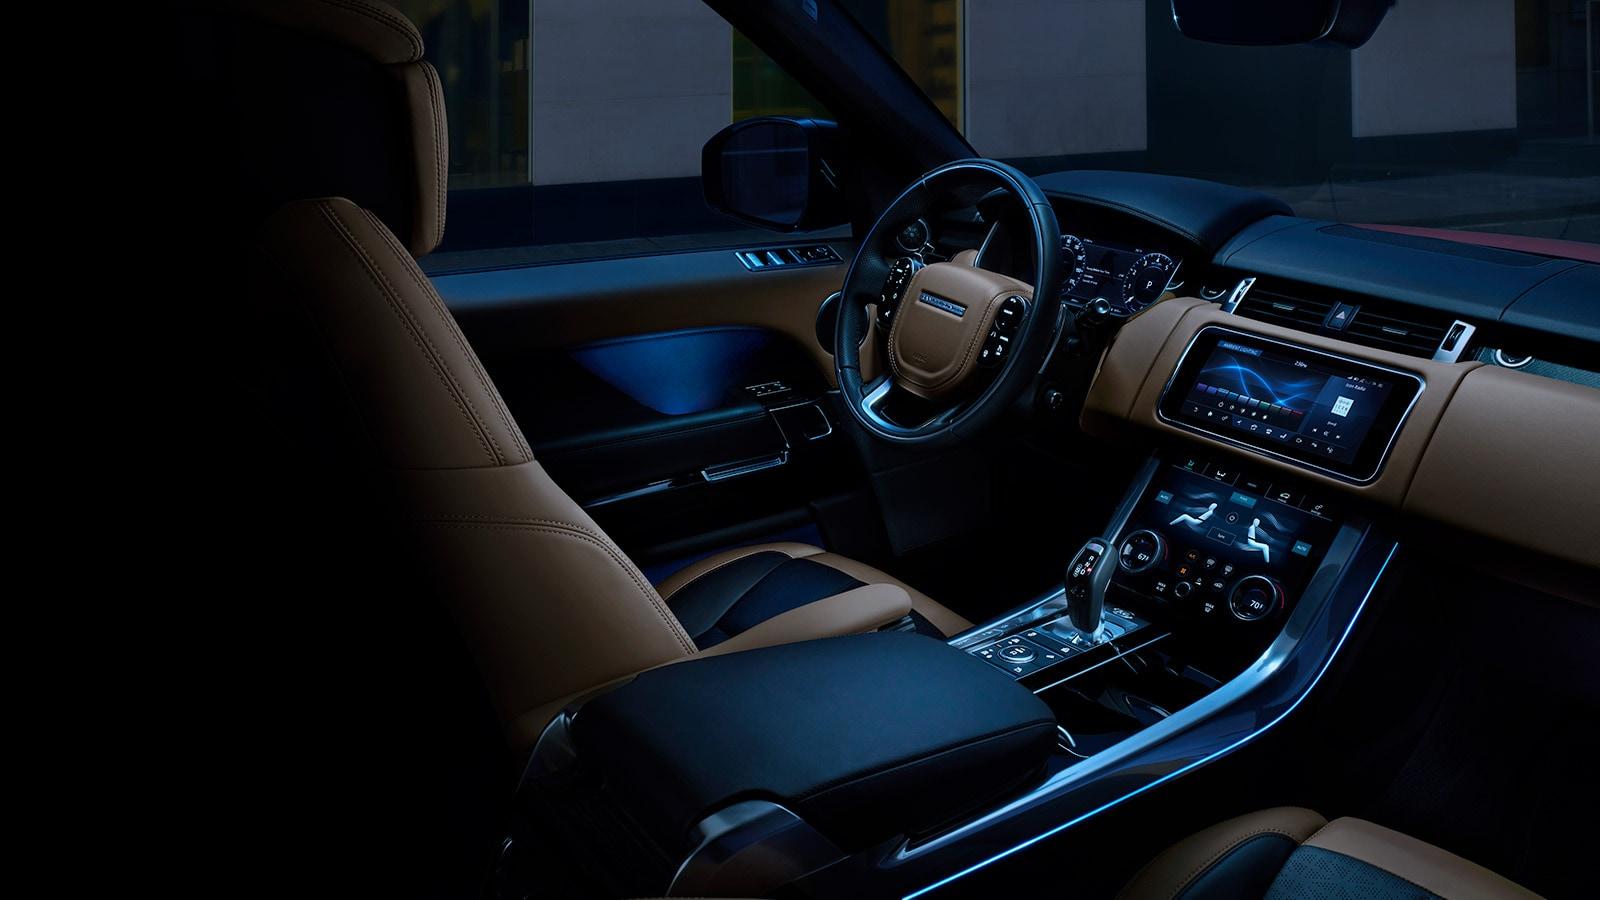 Stunning interior of the 2022 Range Rover Sport in Blue | Photo from landroverusa.com